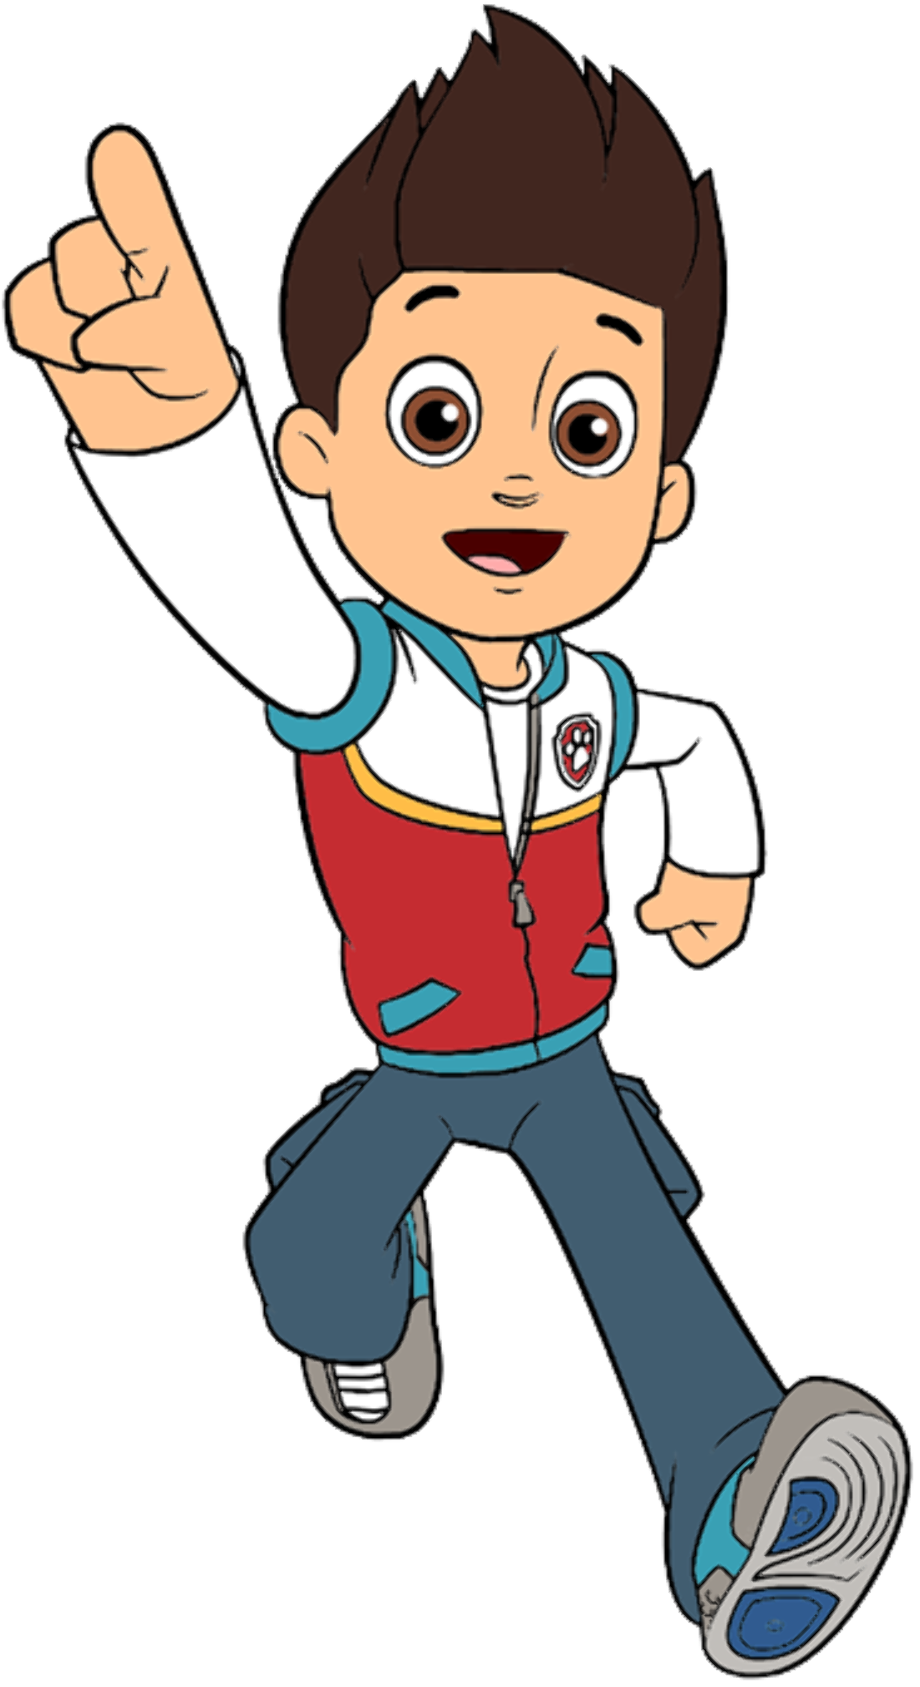 Download High Quality paw patrol clipart ryder Transparent PNG Images